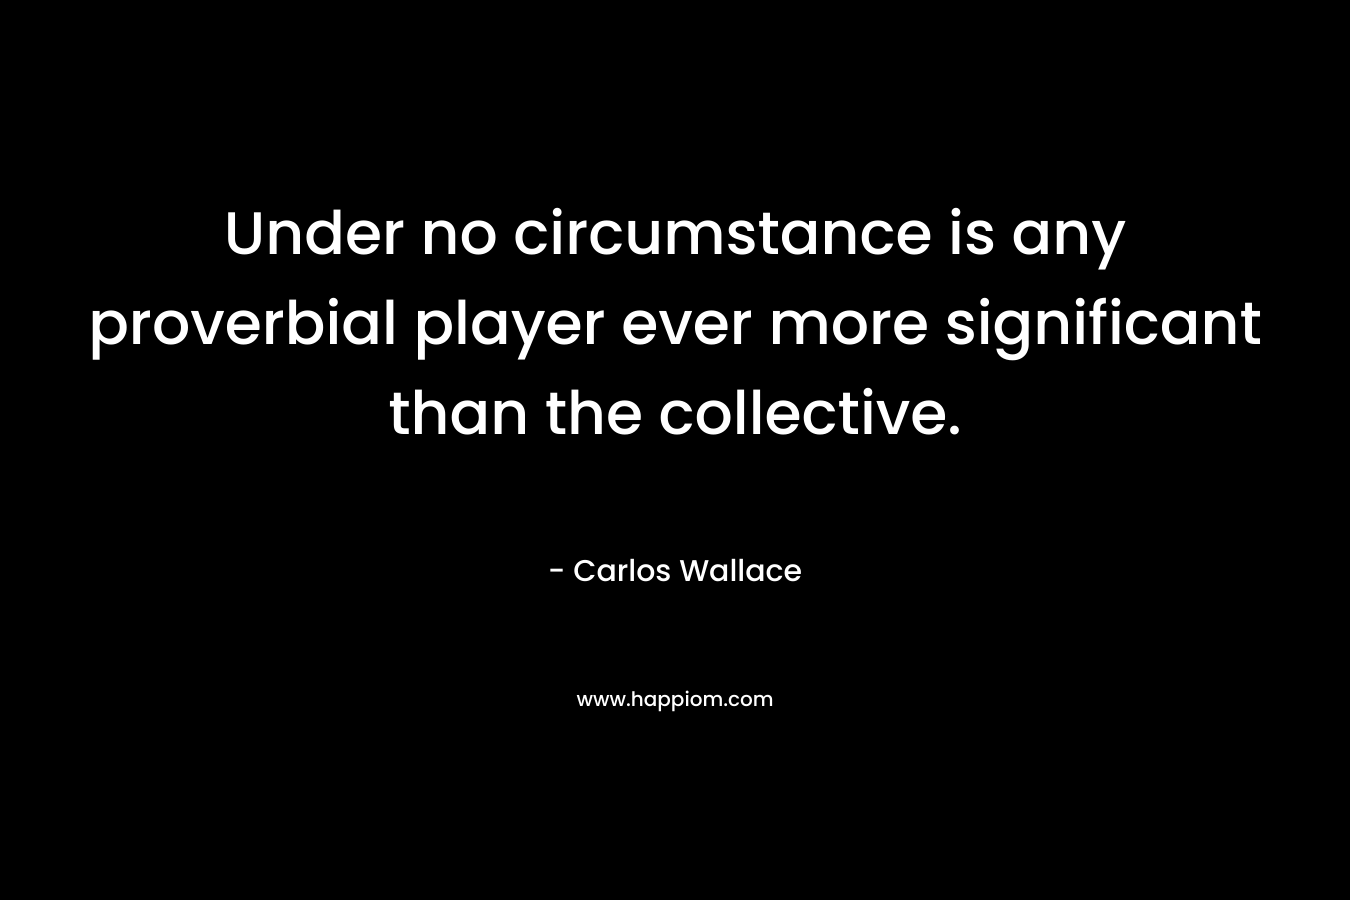 Under no circumstance is any proverbial player ever more significant than the collective. – Carlos Wallace